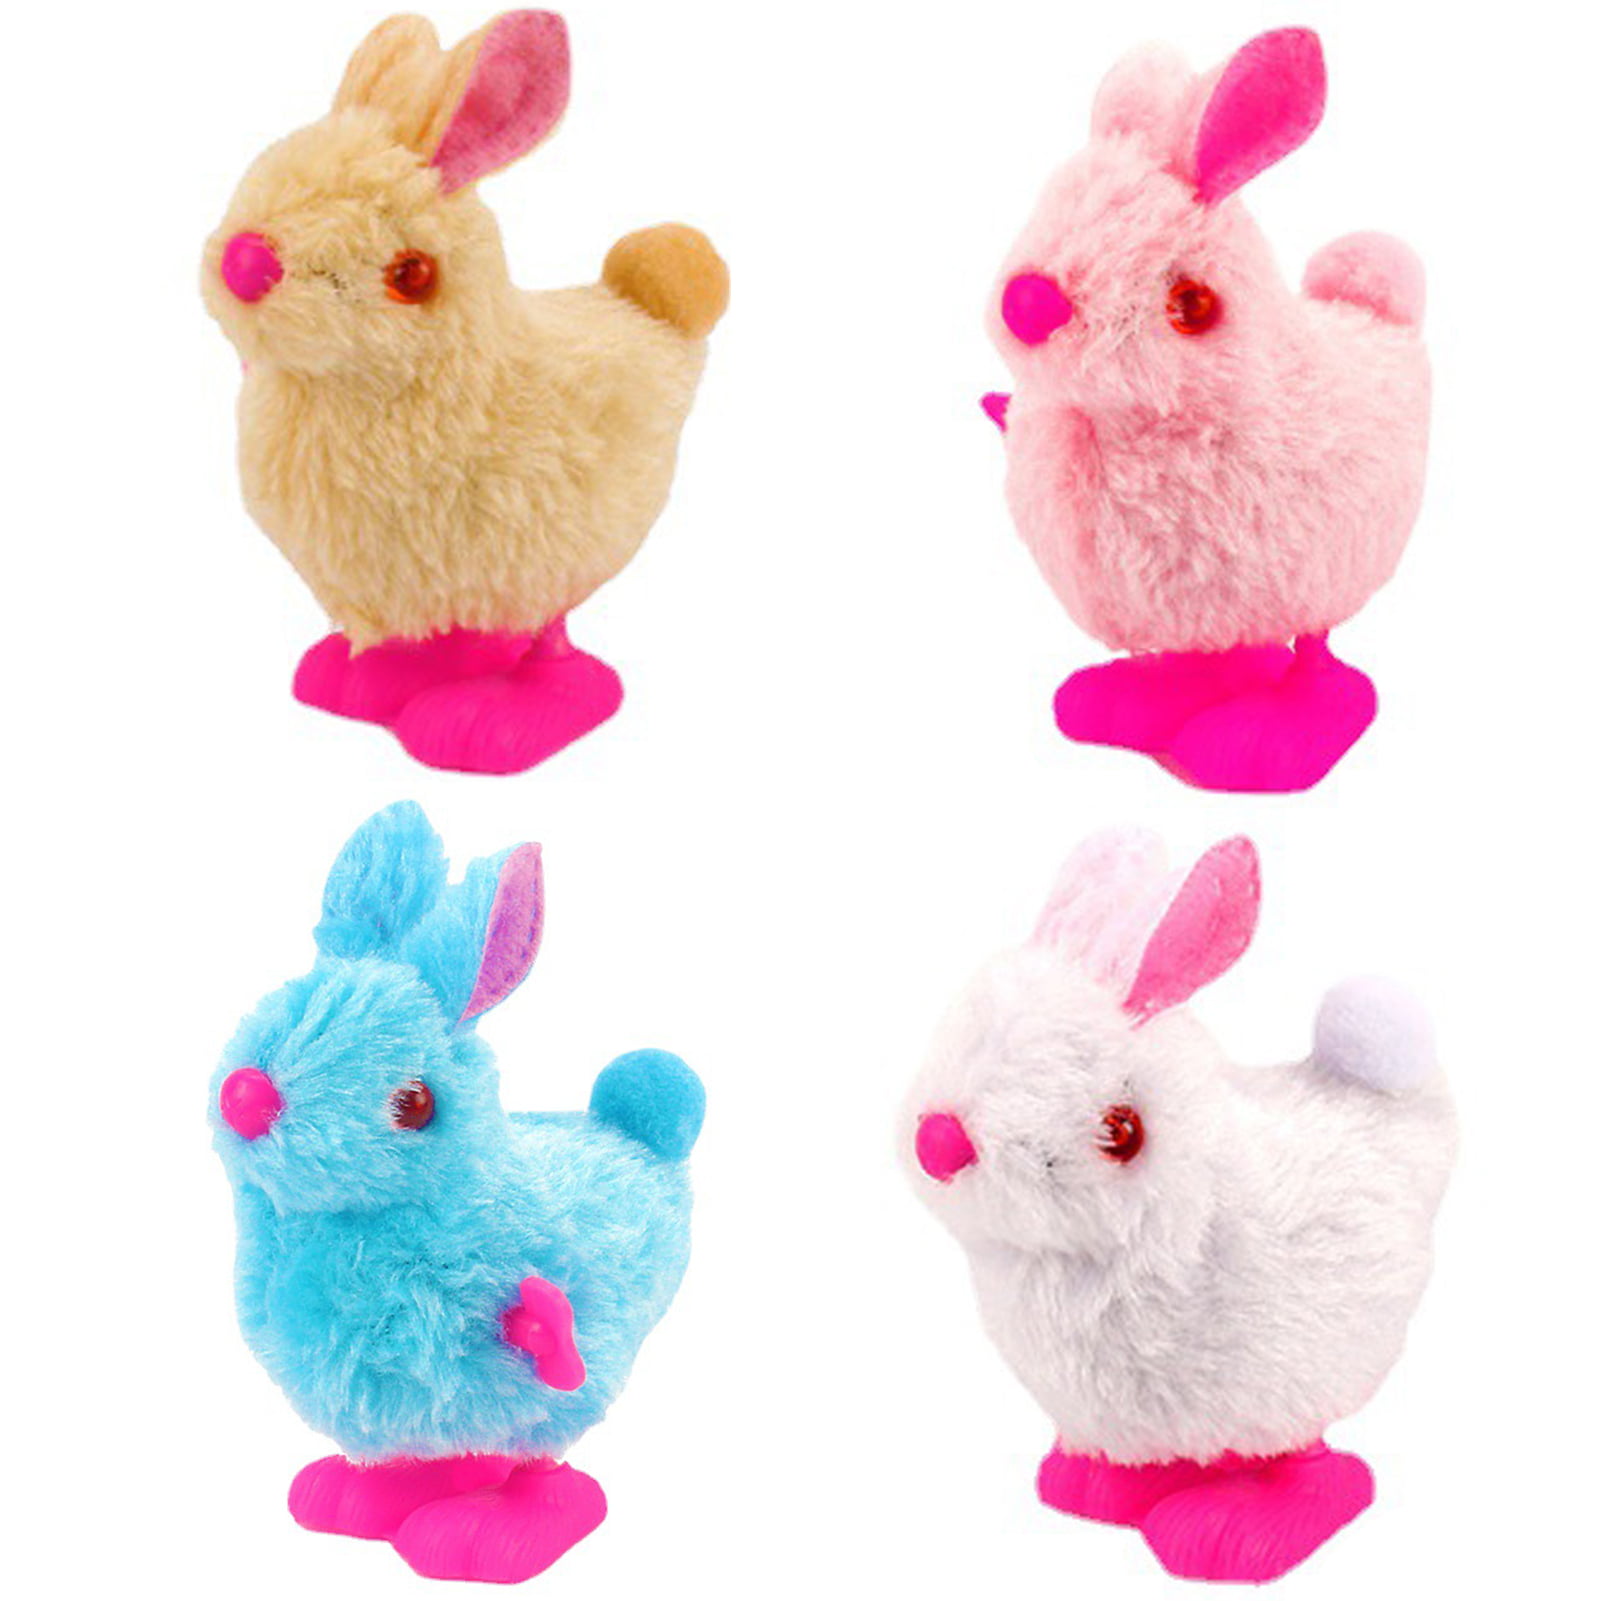 Clockwork Toys Wind Up Toys Mini Toy Wind-Up Rabbit Multi-Color Plush Chicks Toys Clockwork Toys for Party Supplies Favors Goody Bag Fillers,4 Pack